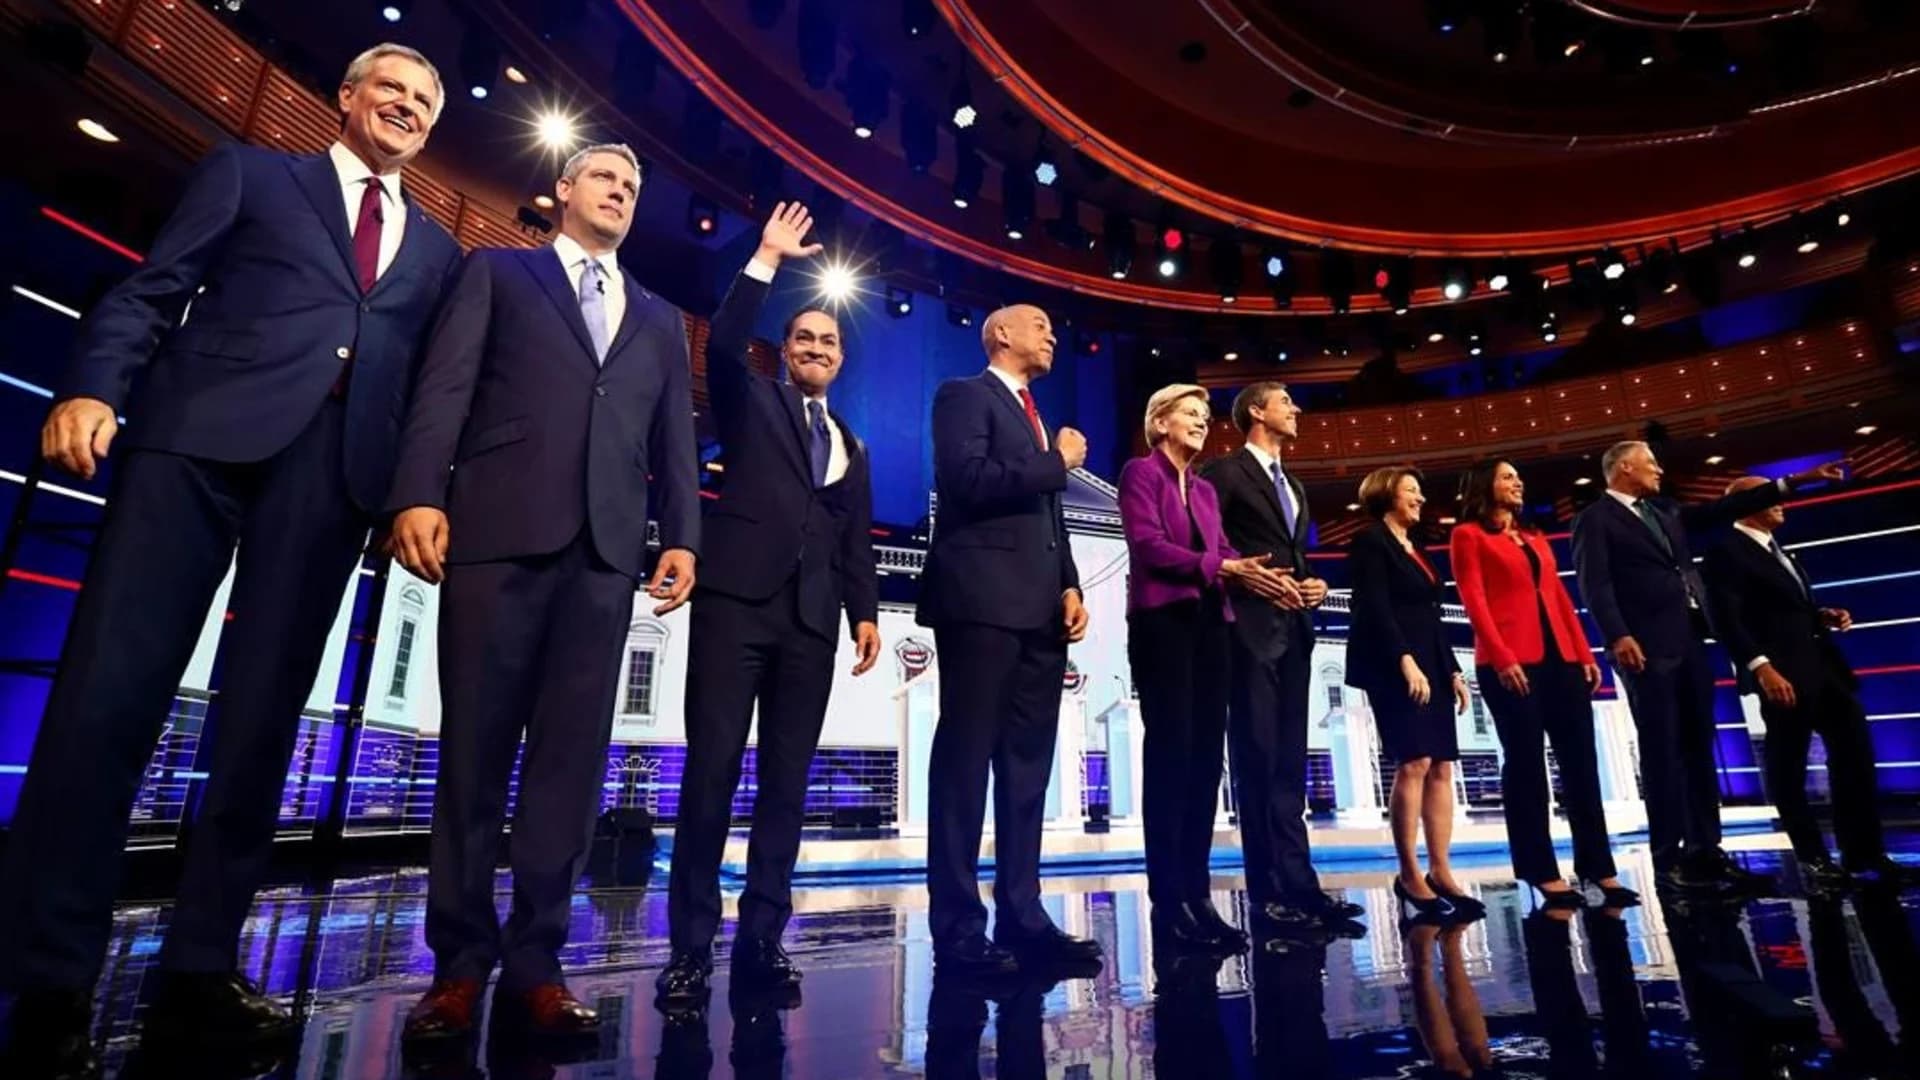 Democrats rail against economy-for-the-rich in first debate